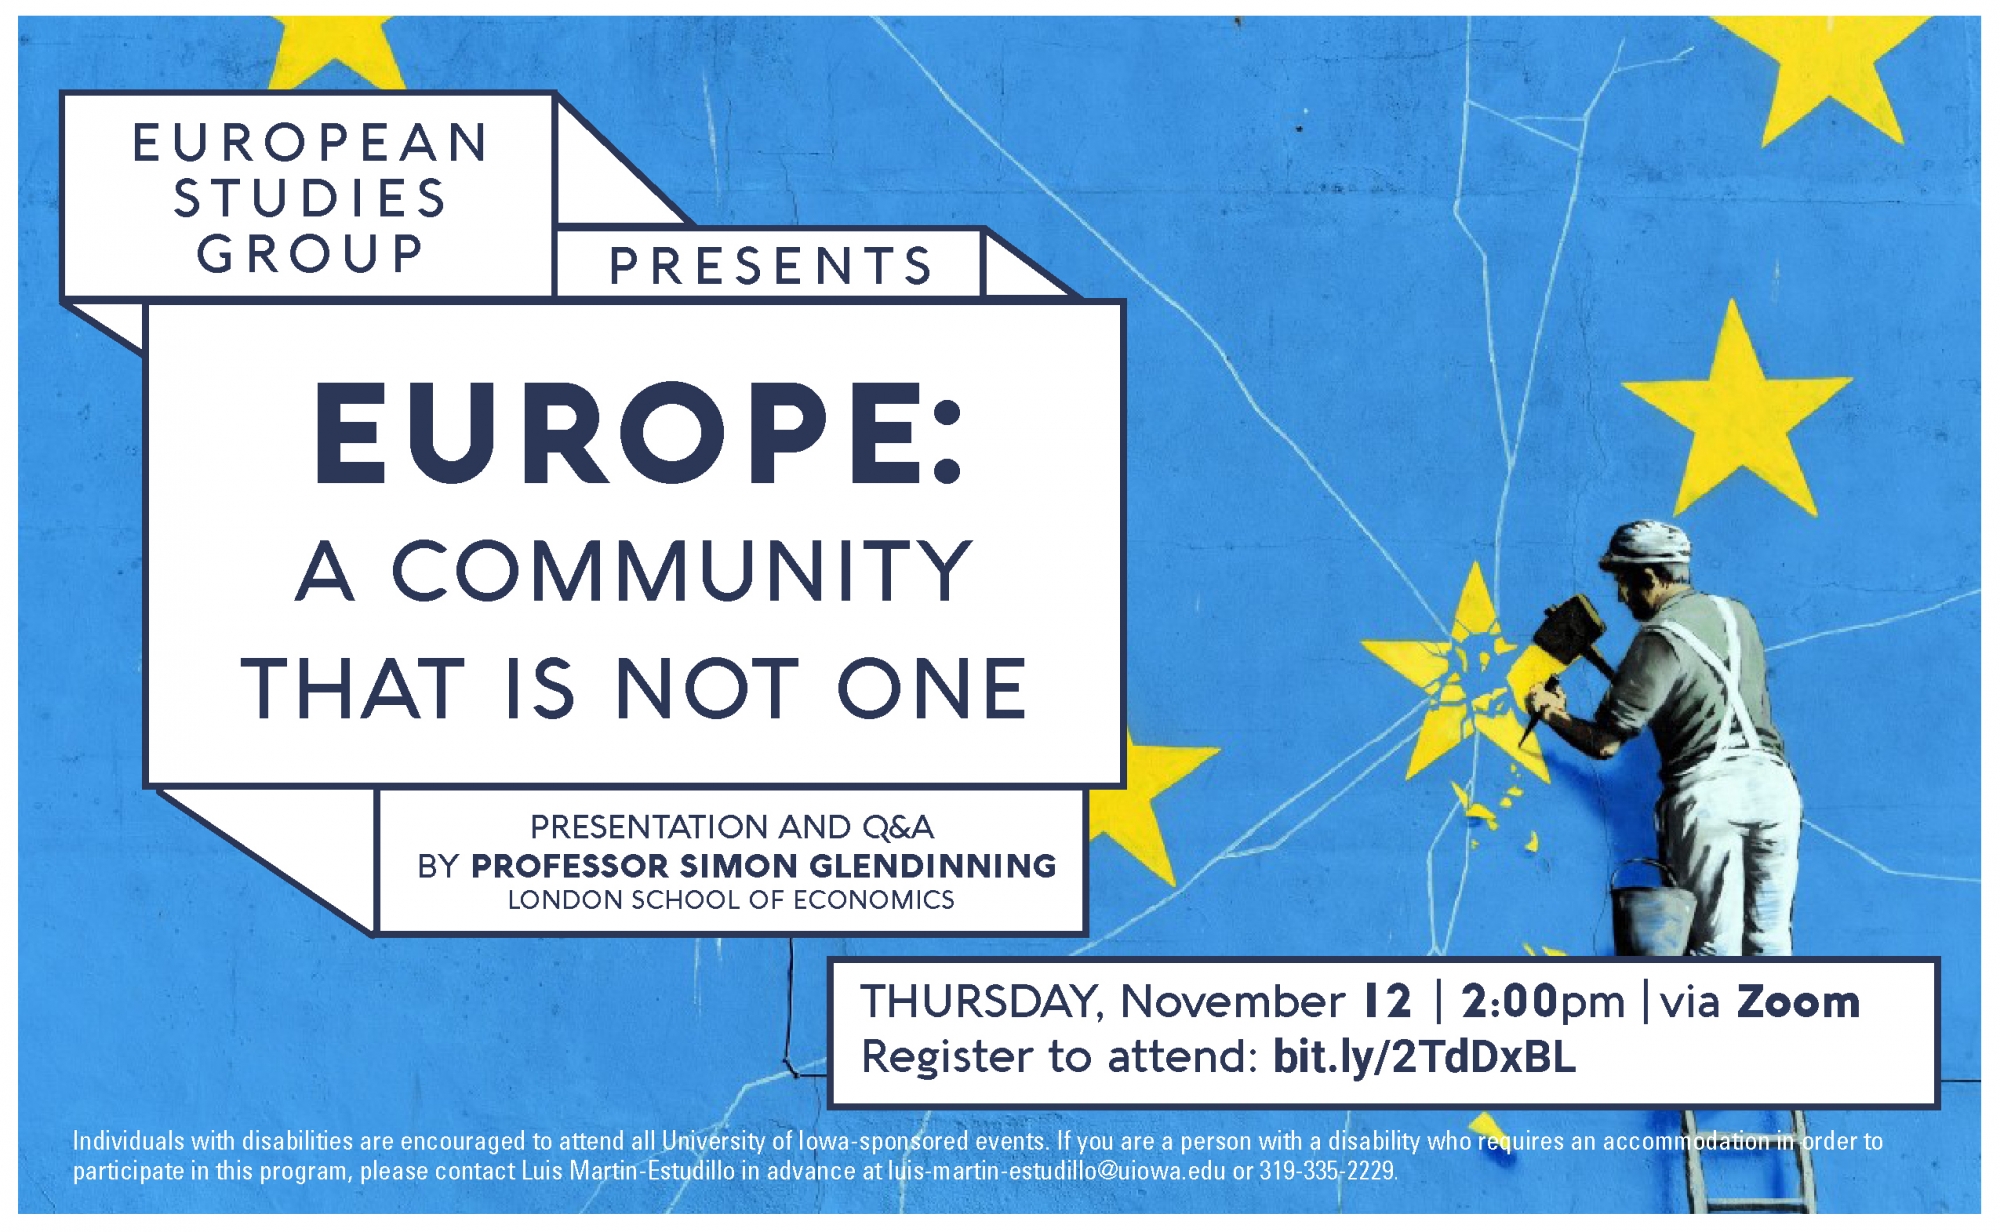 European Study Group presents Europe A community that is not one. A presentation and Q&A by Professor Simon Glendinning London School of Economics. Thursday  November 12 at 2 pm happening via Zoom. Register to attend at bit.ly/2TdDxBL